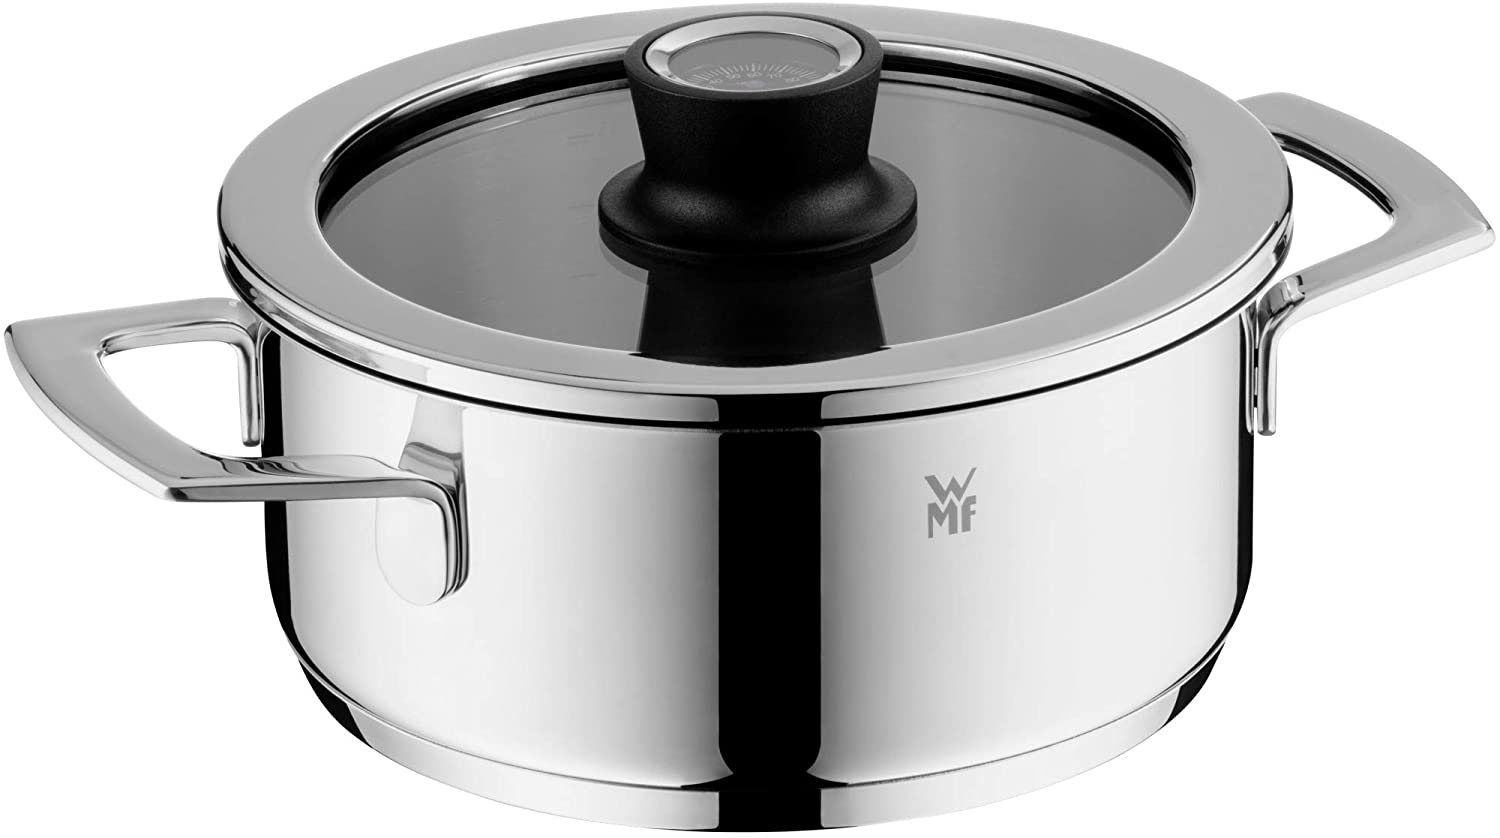 WMF VarioCuisine Saucepan 20 cm Silence Glass Lid with Thermometer, Stewing Pot 2.5 Litres Polished Cromargan Stainless Steel Induction Saucepan Uncoated